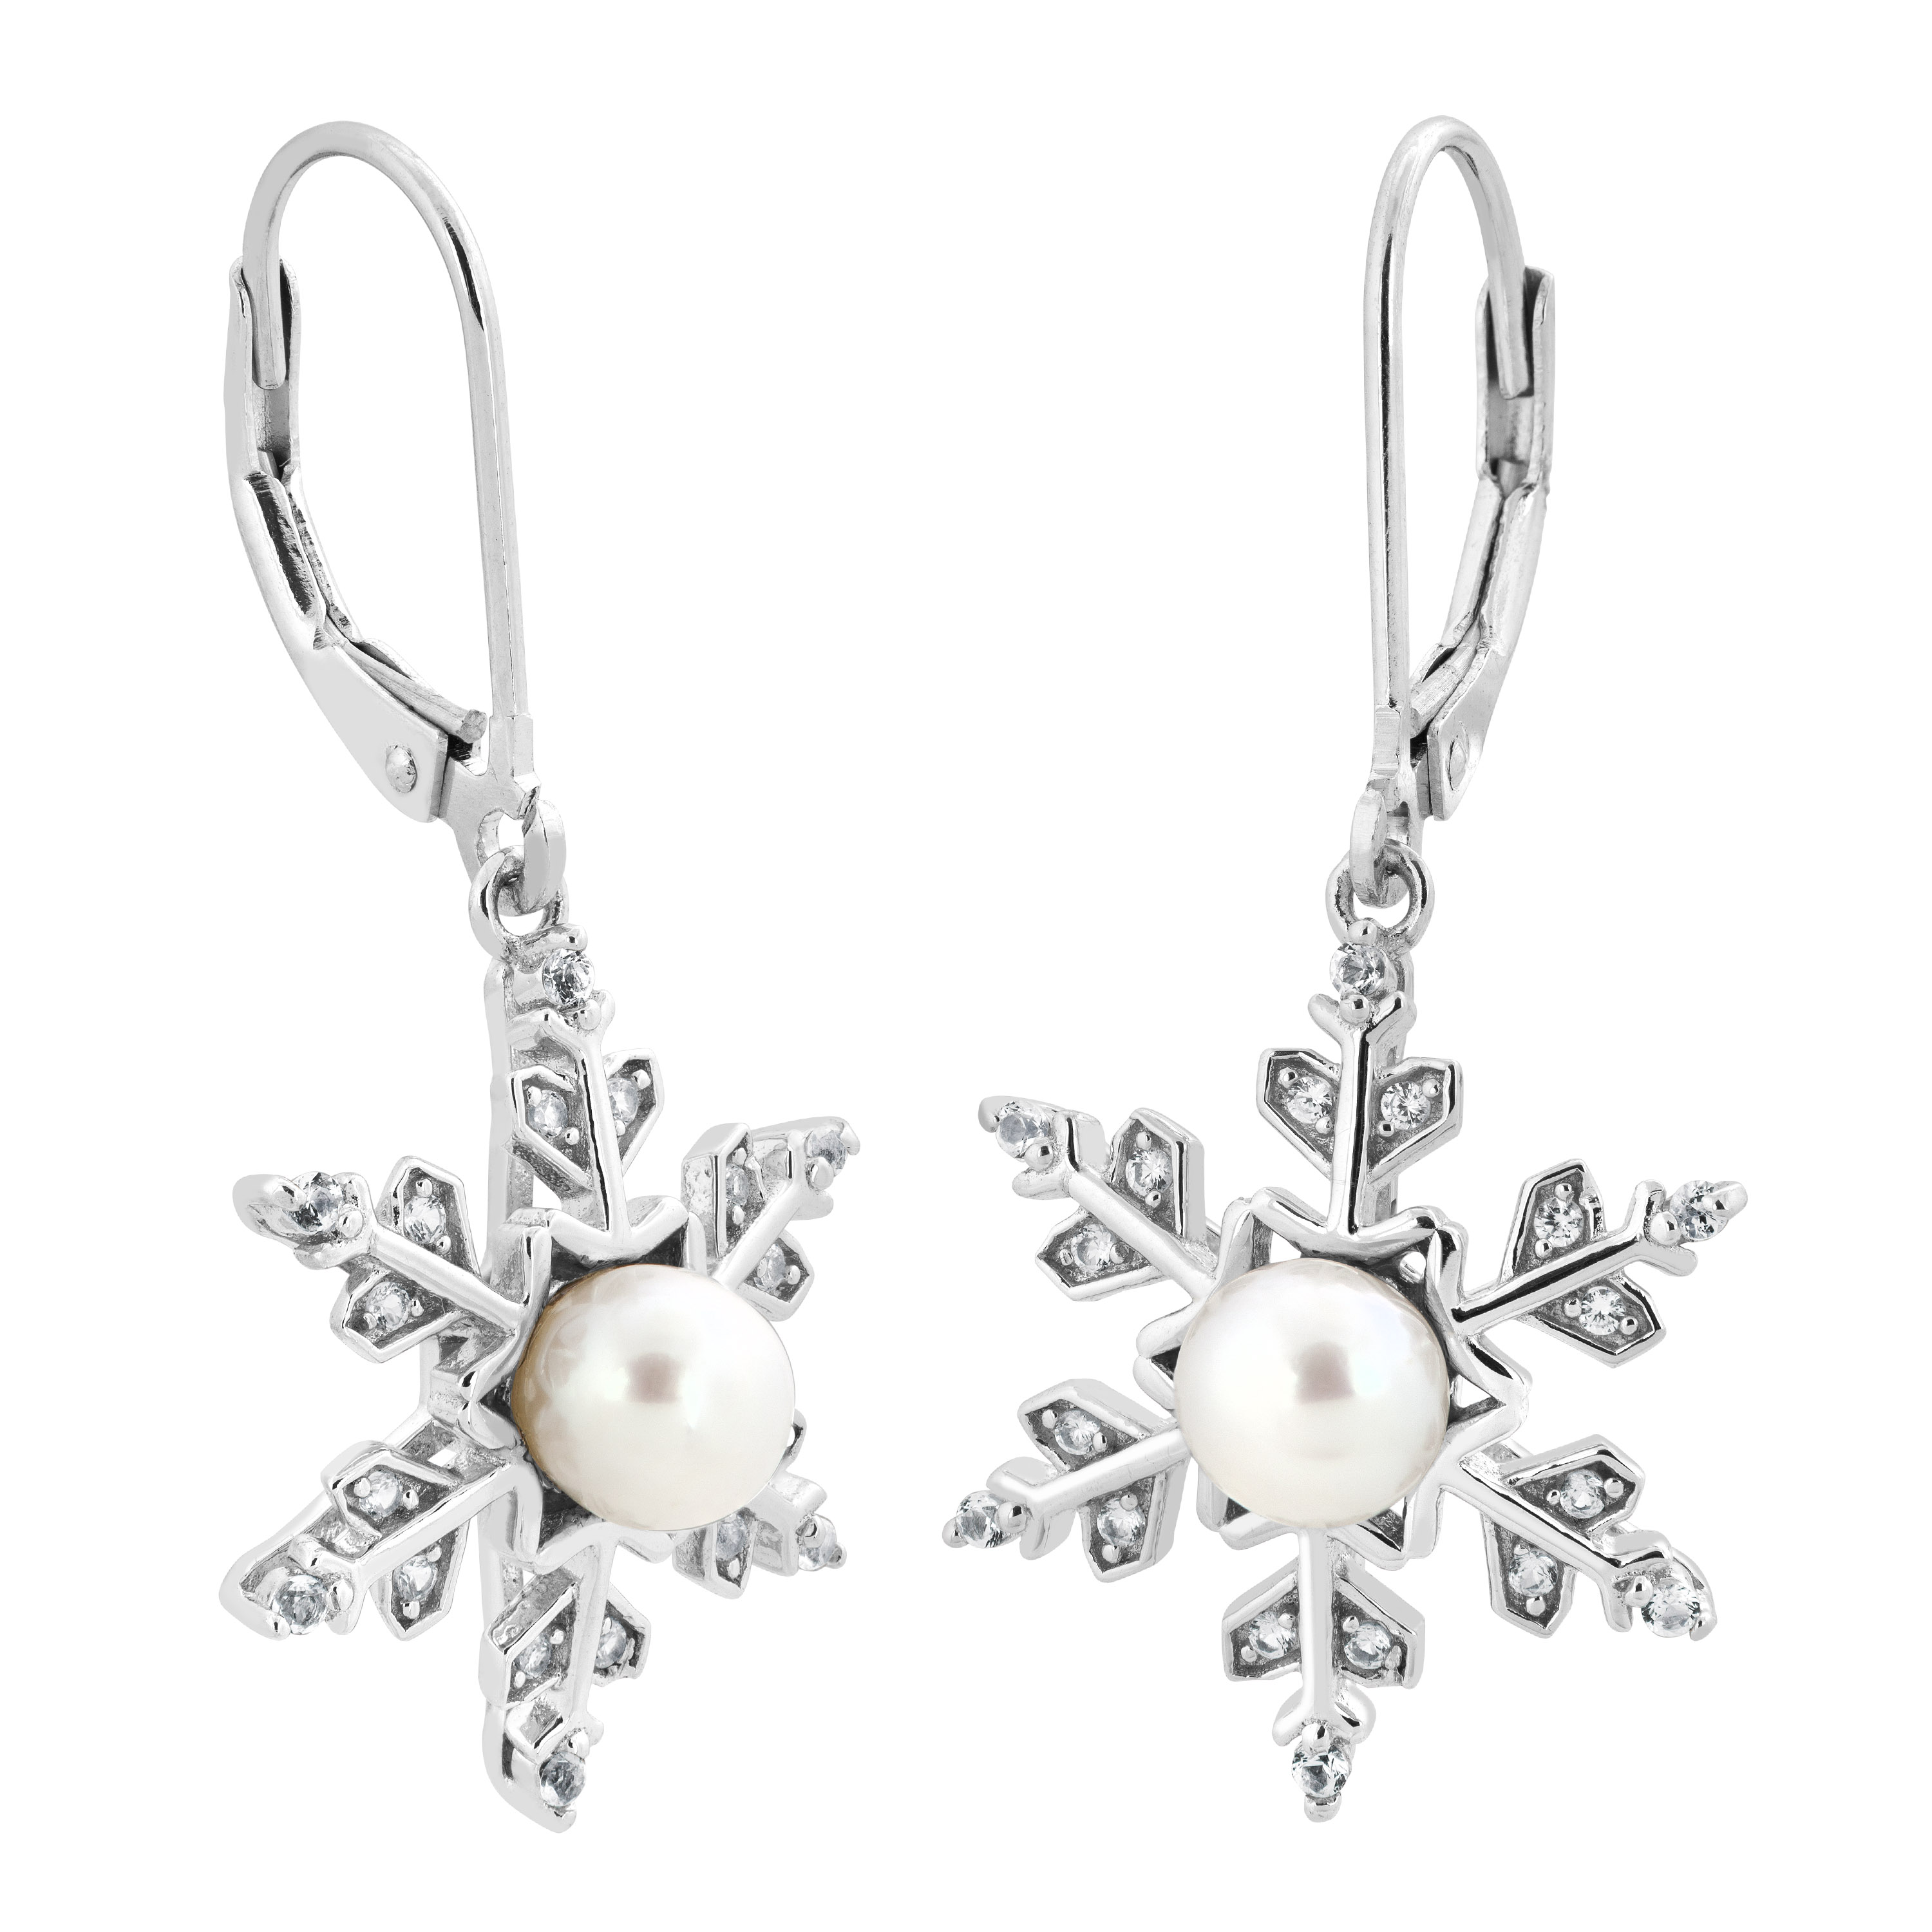 Snowflake white freshwater cultured pearl and CZ dangle earrings handmade in rhodium plated sterling silver.